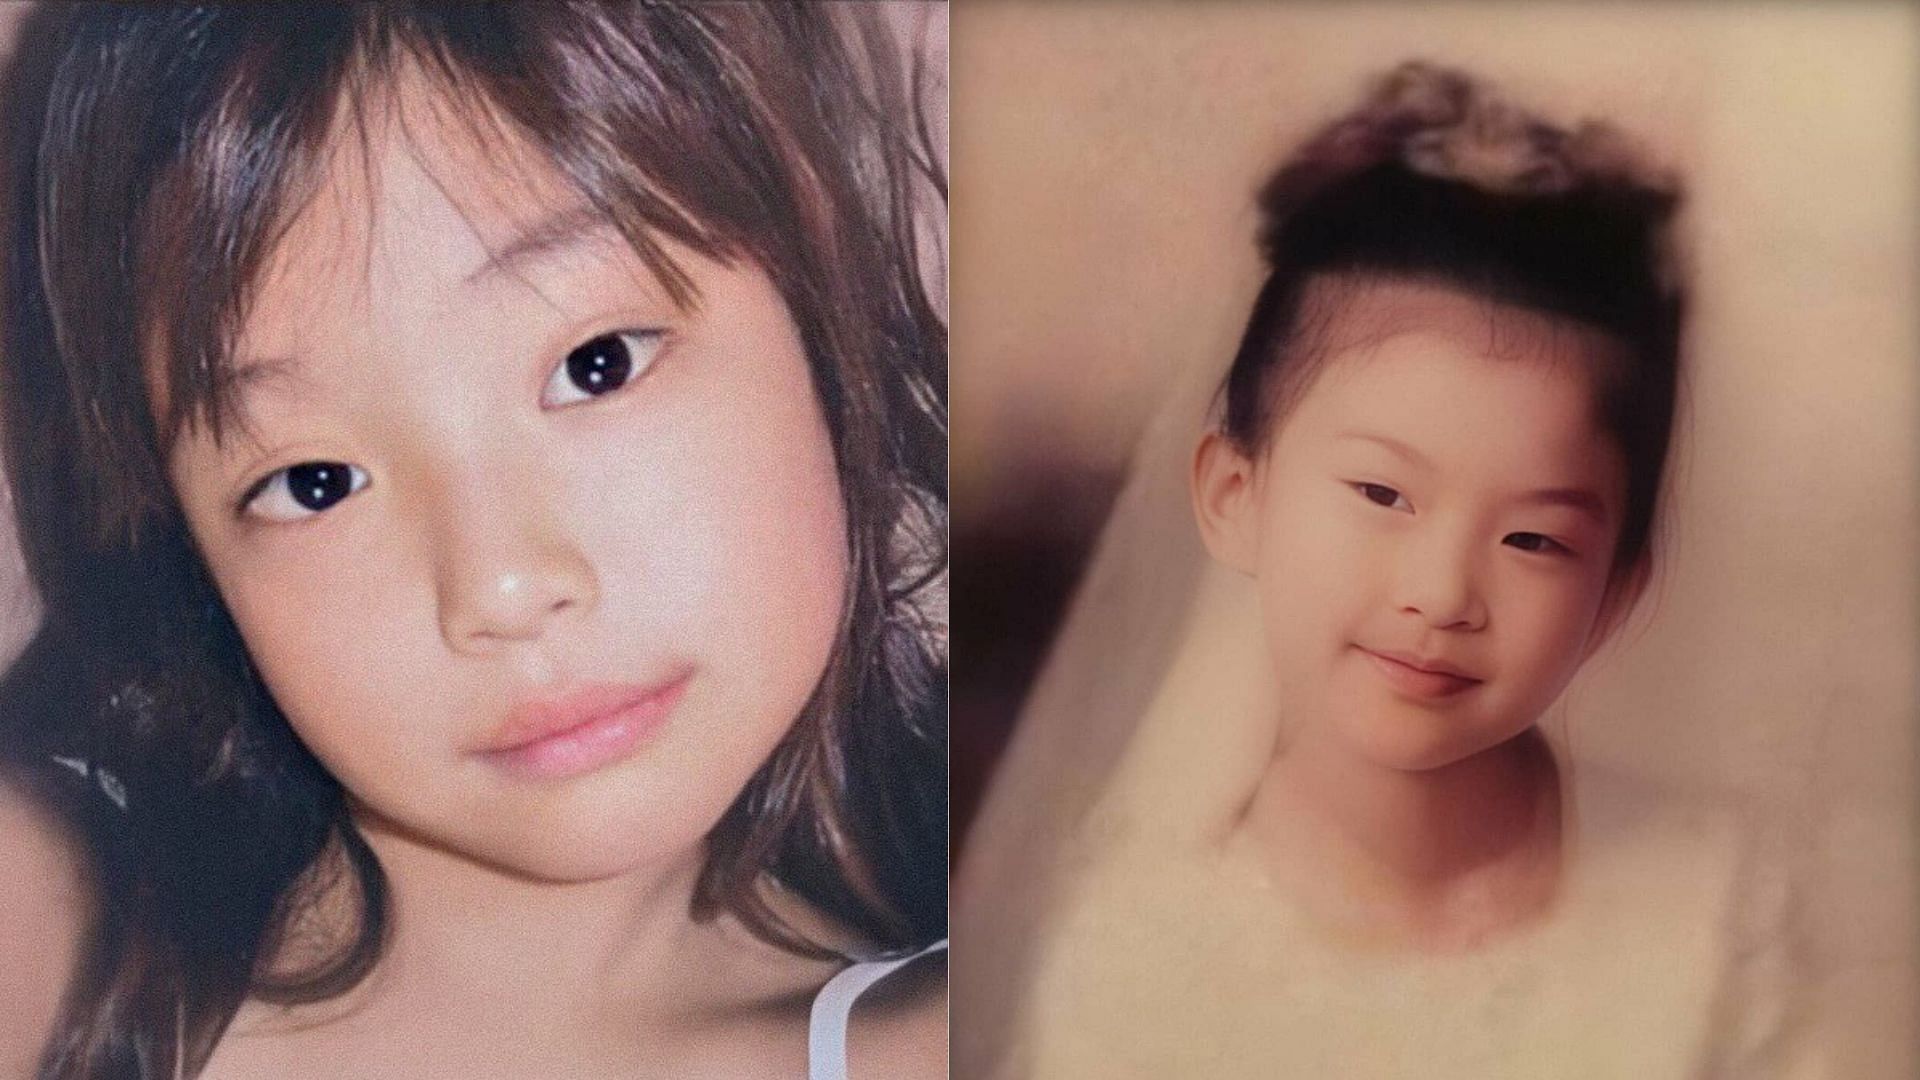 Baby pictures of Jennie and Rose (Image via Twitter/jenniethinker and Twitter/ROSEVotingTeam)